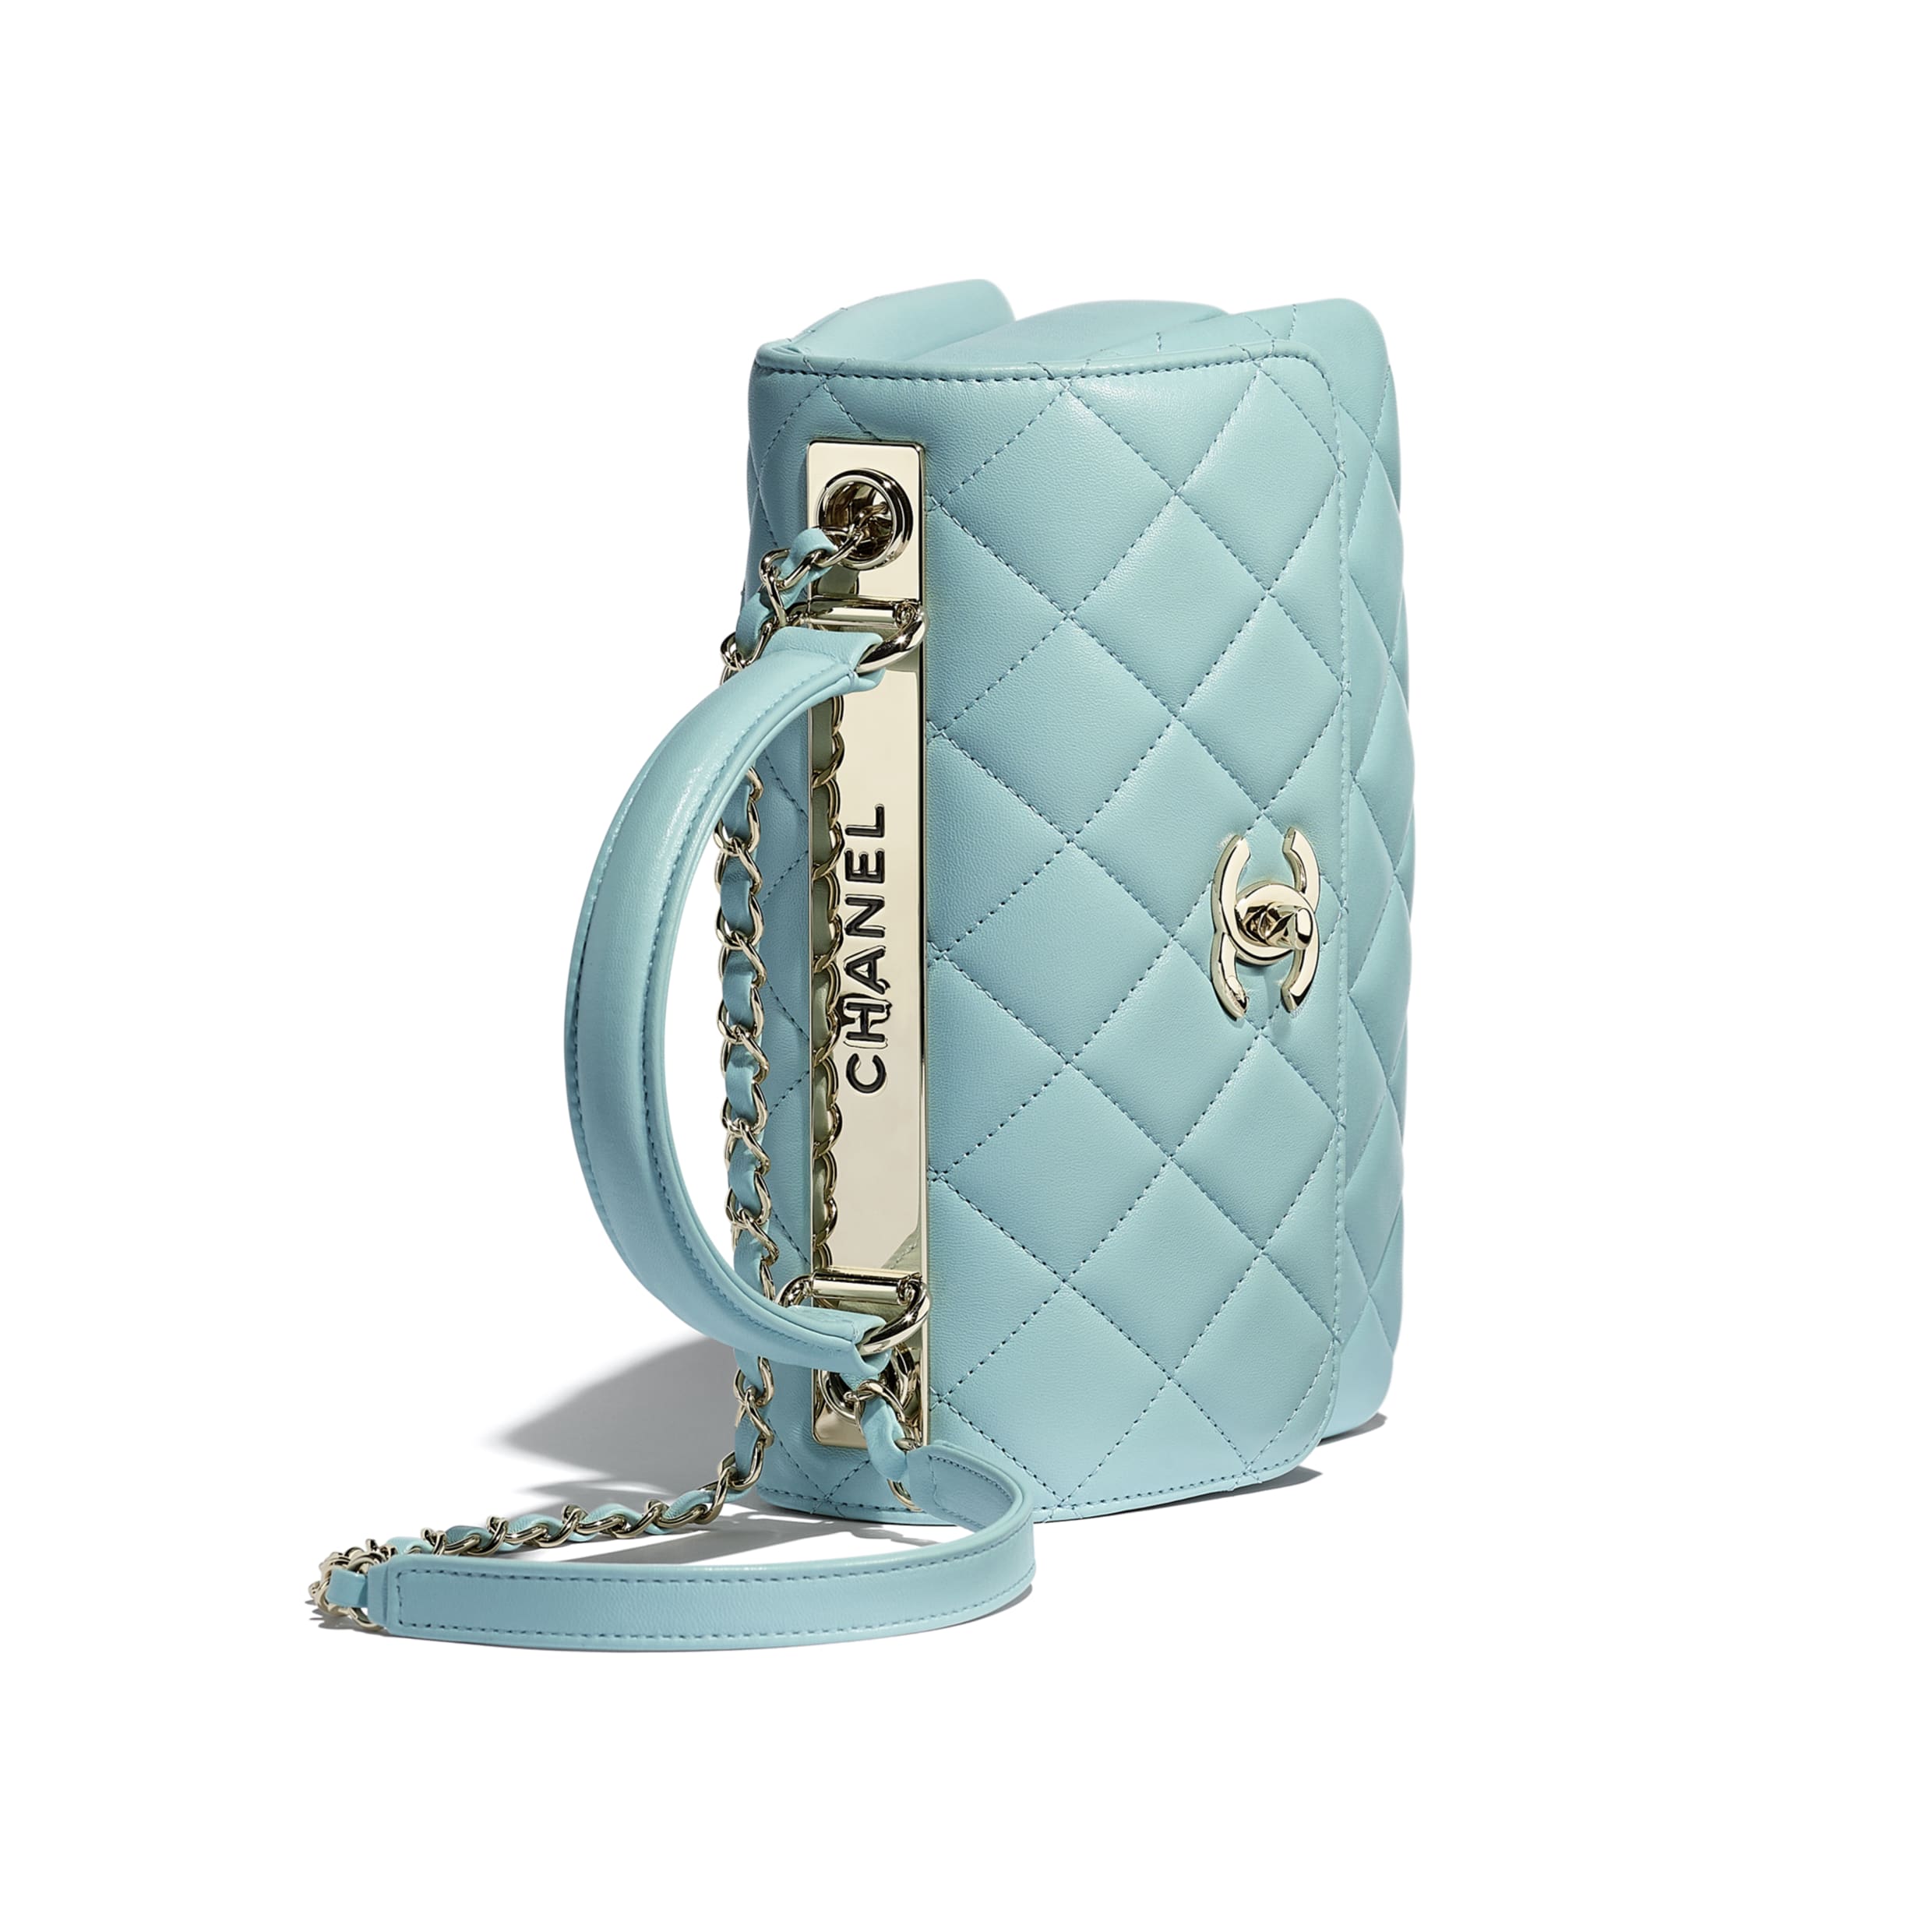 Chanel Small Flap Bag With Top Handle Light Blue-Gold